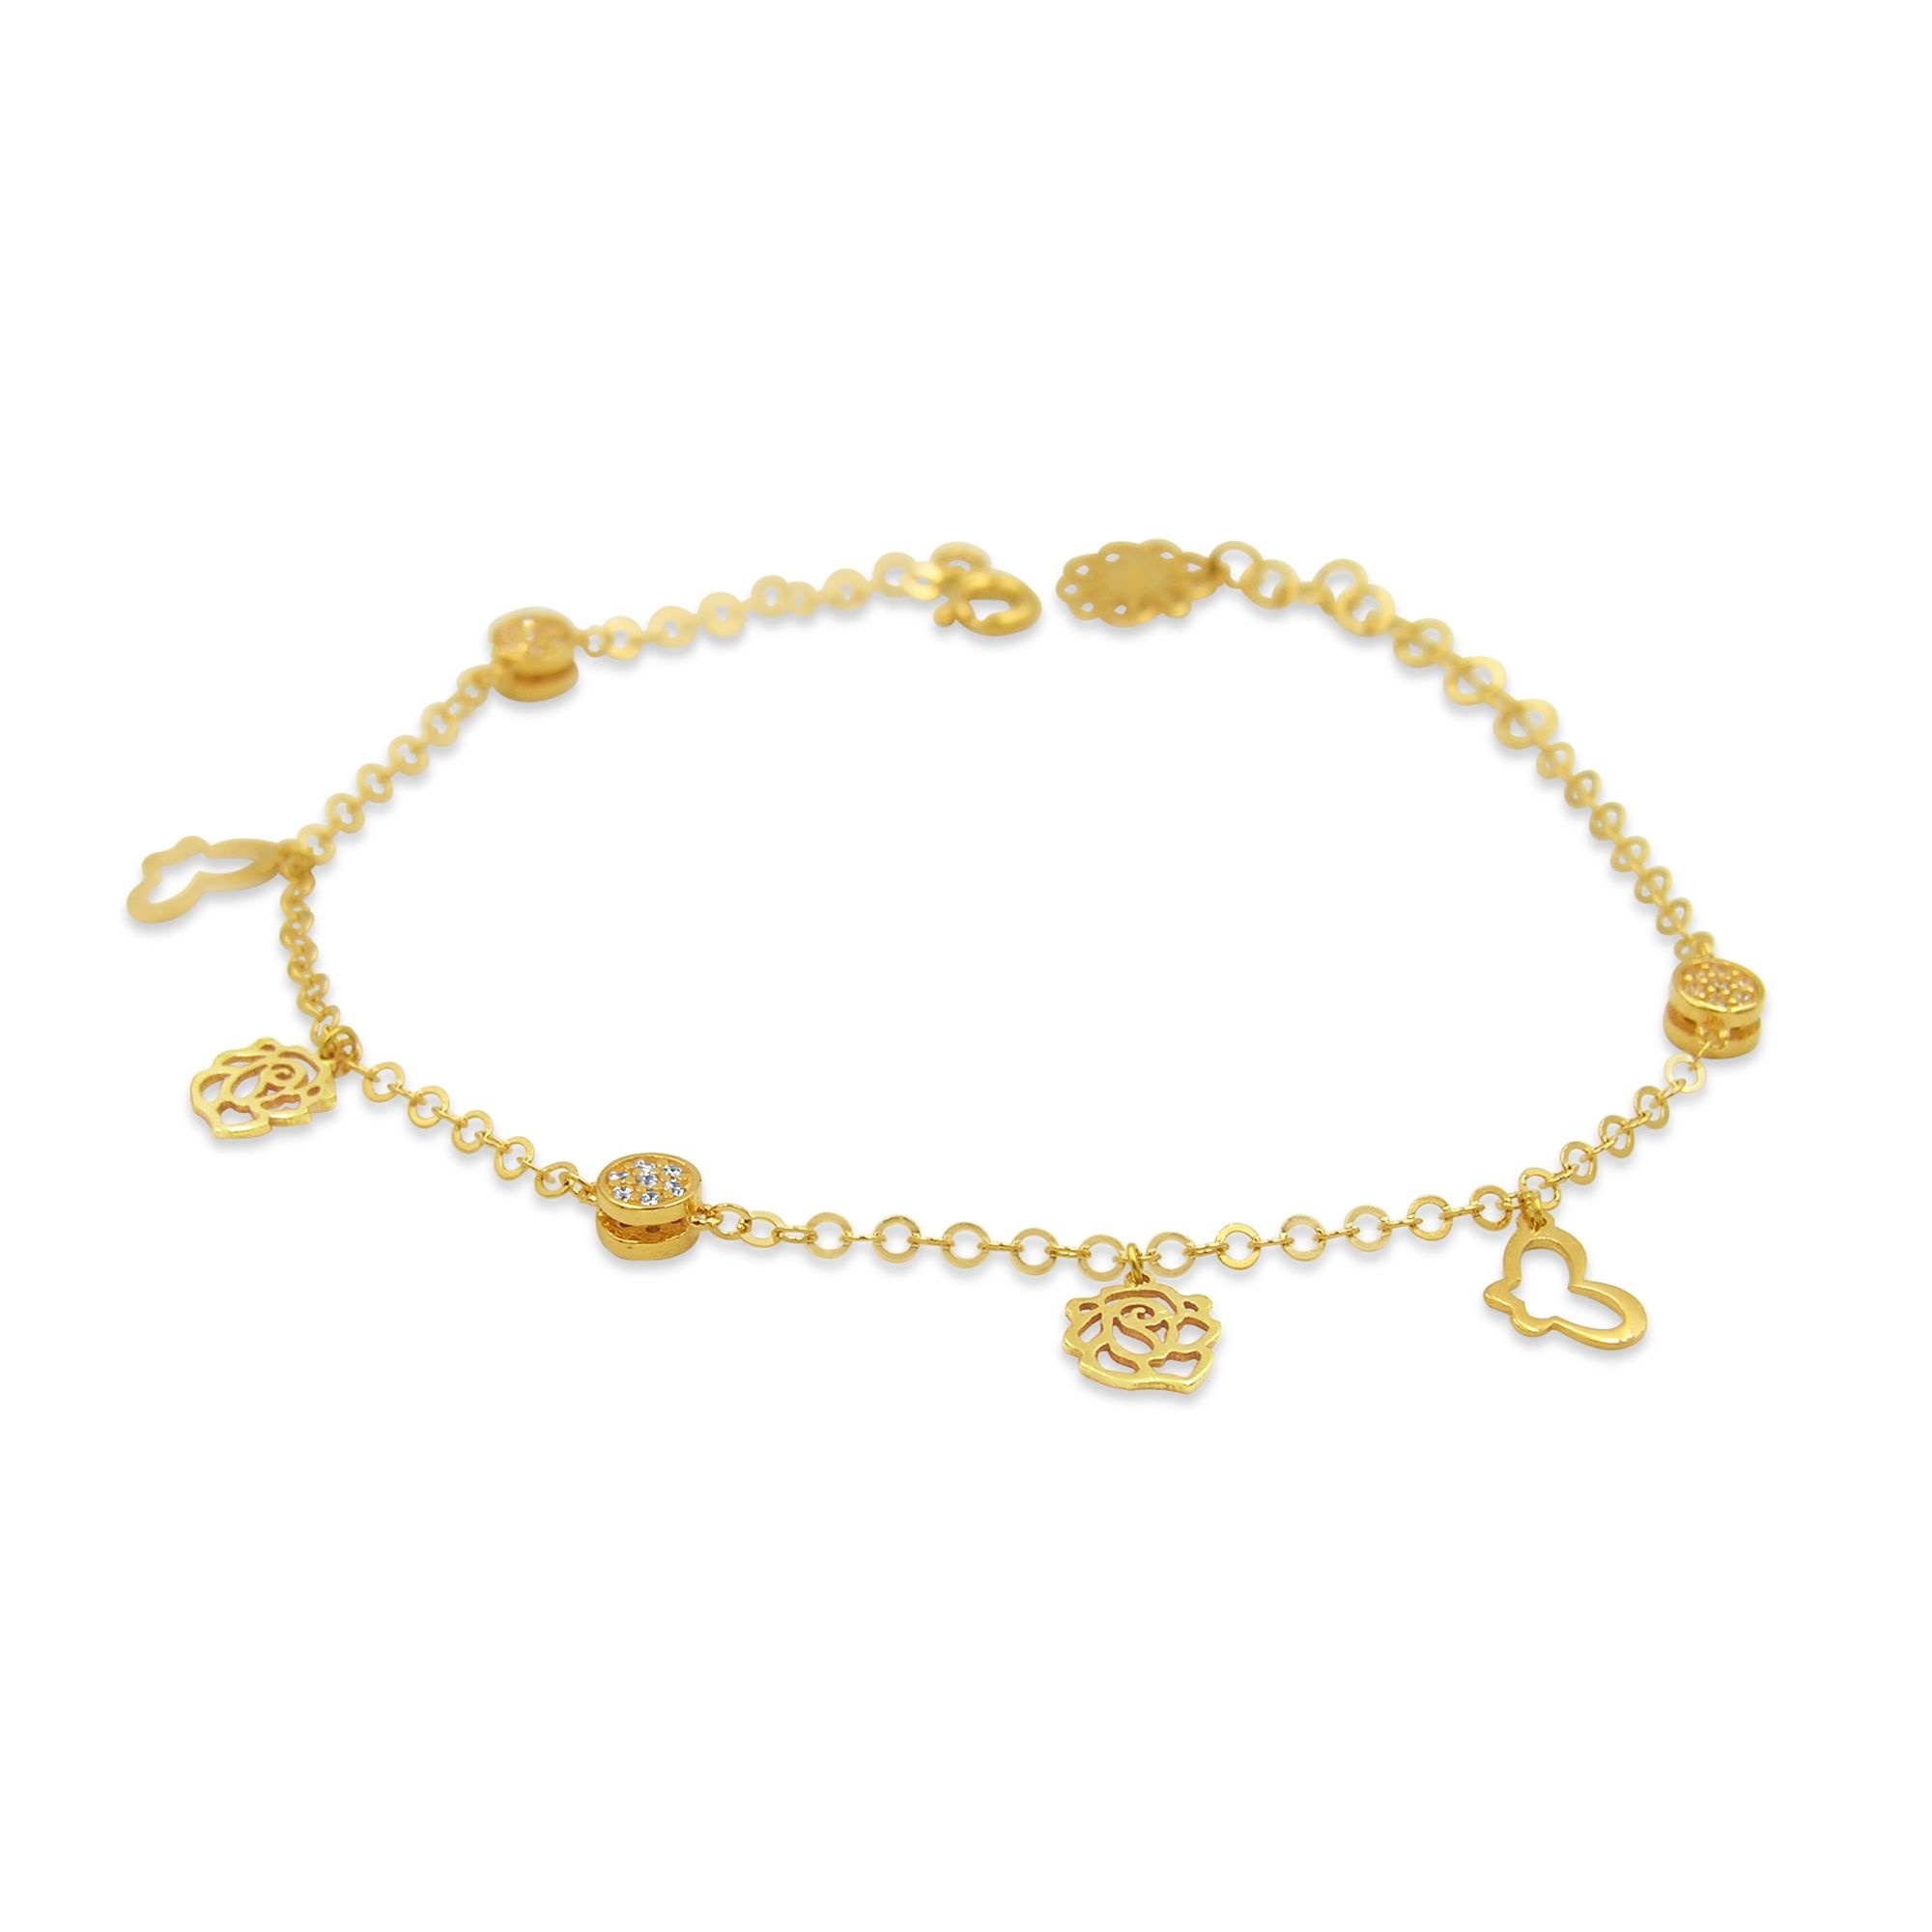 18 kt yellow gold charm bracelet with 3 color gold with zirconia